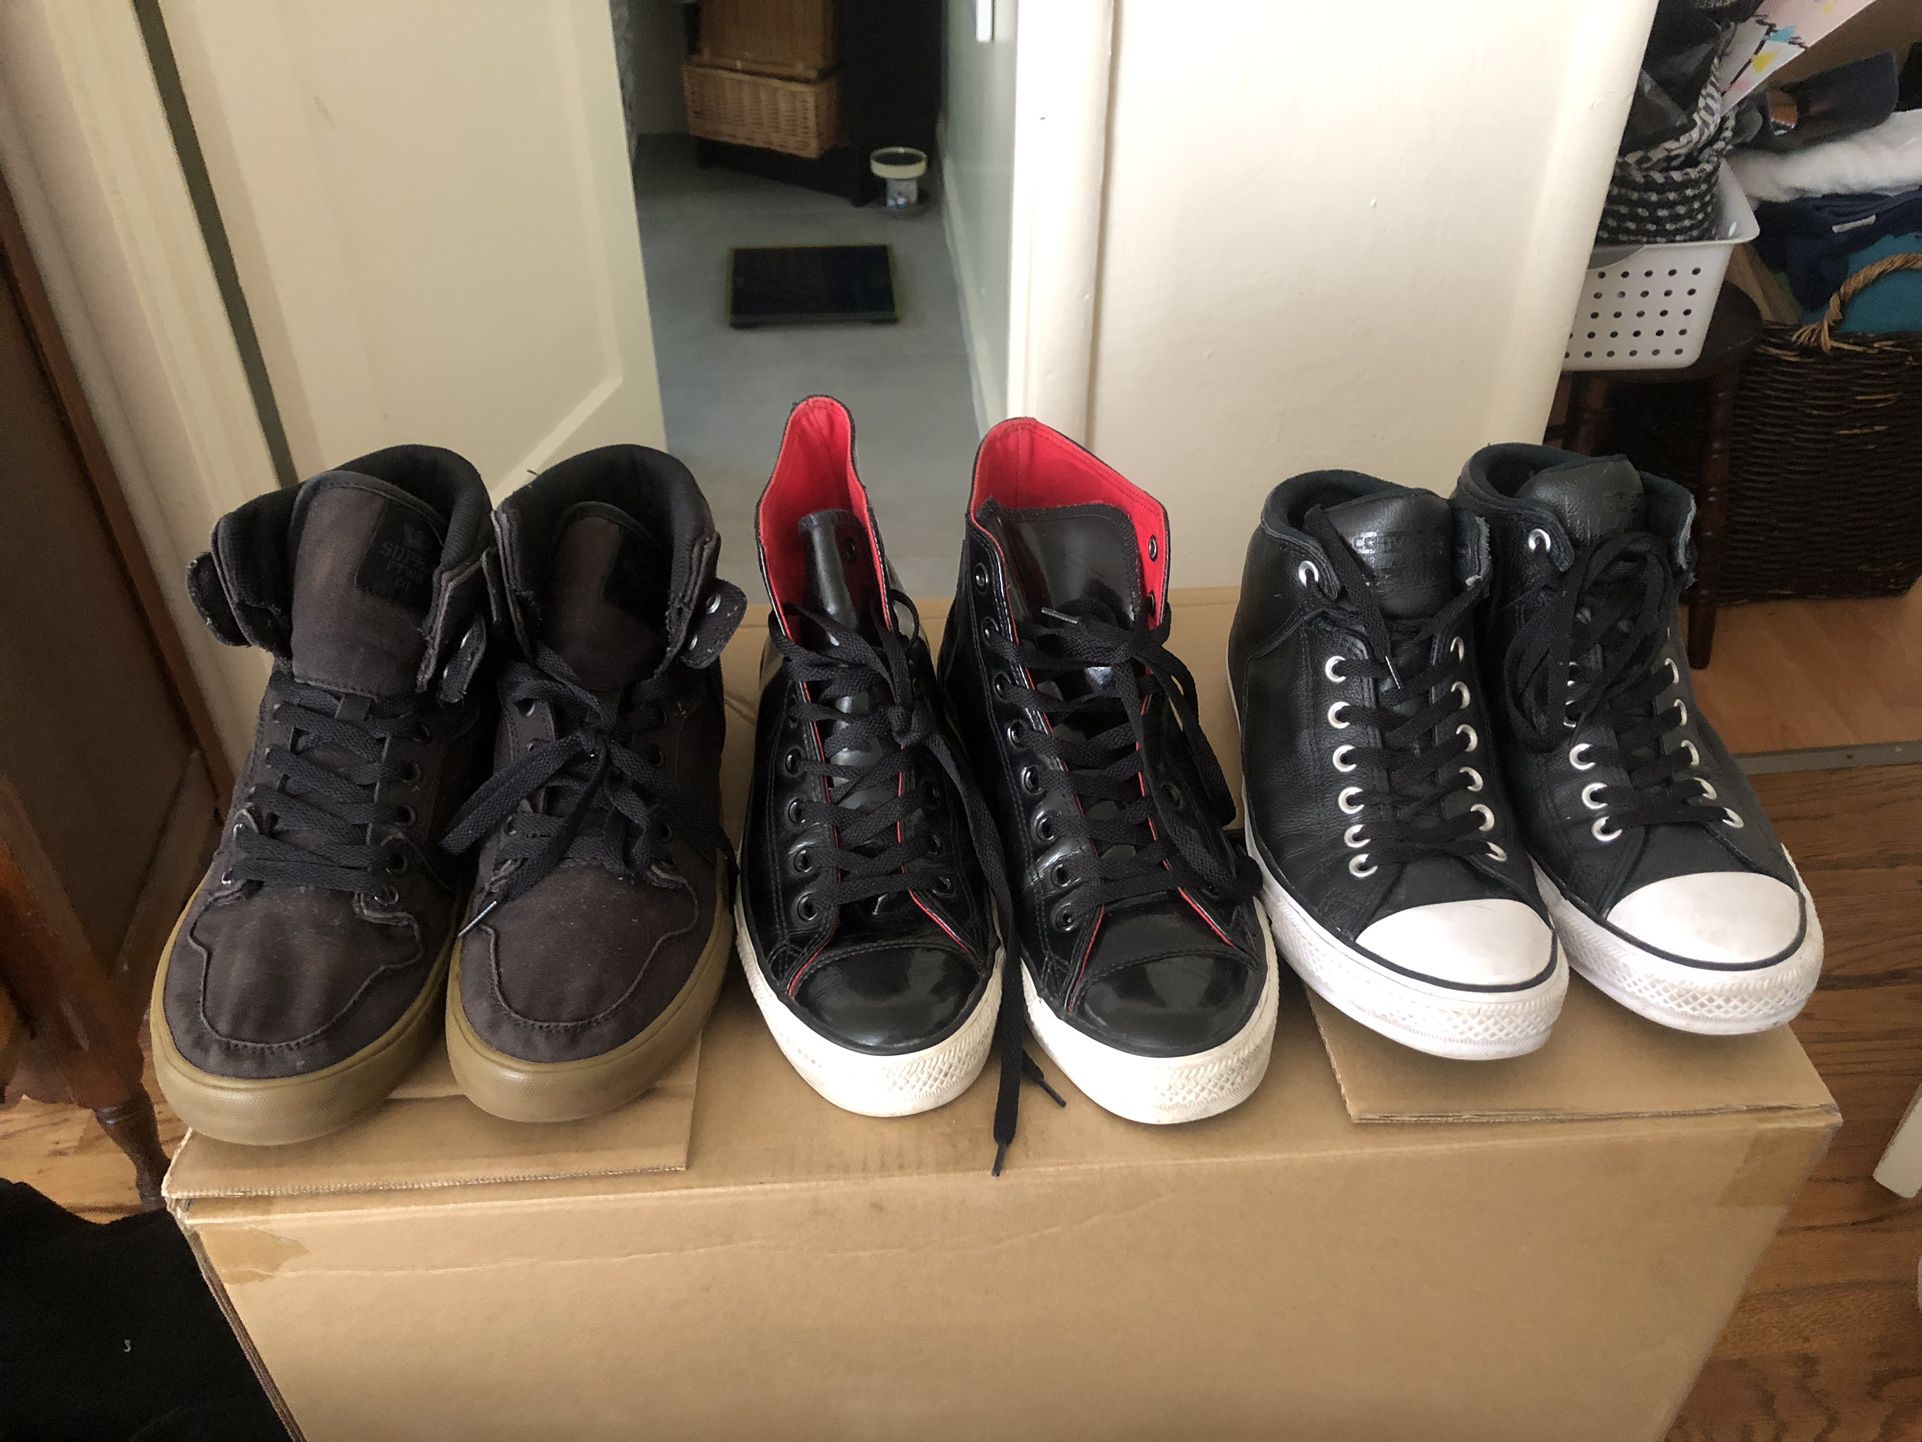 2 Pairs of Converse Tennis Shoes And 1 Supra All For $140 Or $40 Each Pair Look At The Pics For Sizes 